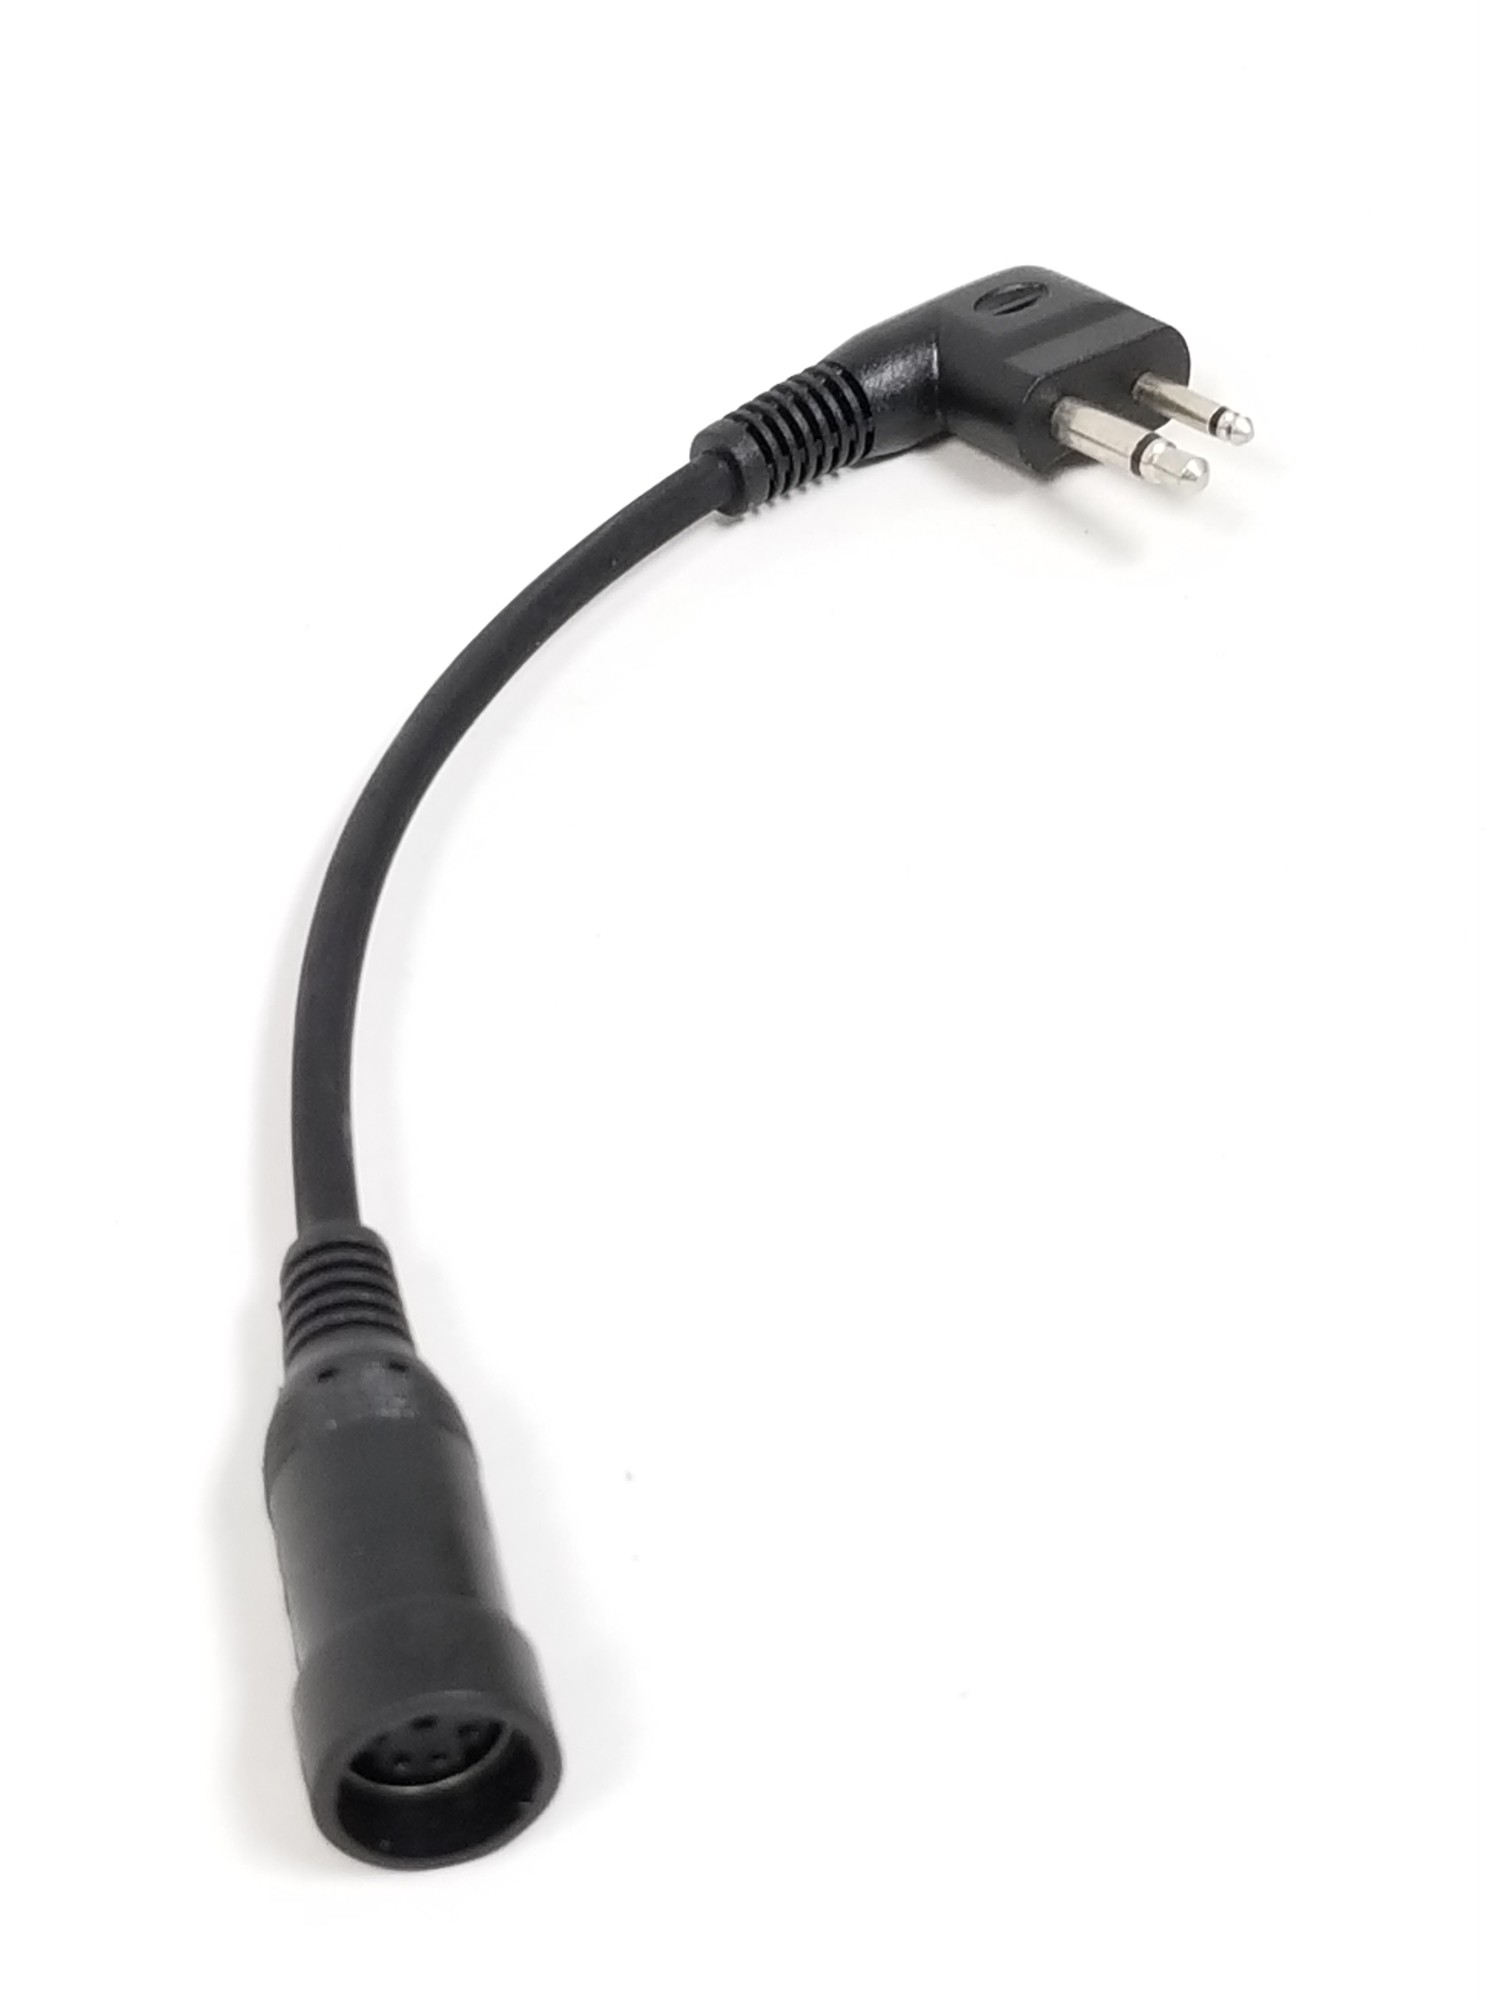 2-WAY RADIO ADAPTER CABLE W/2 PRONG FOR MOTOROLA